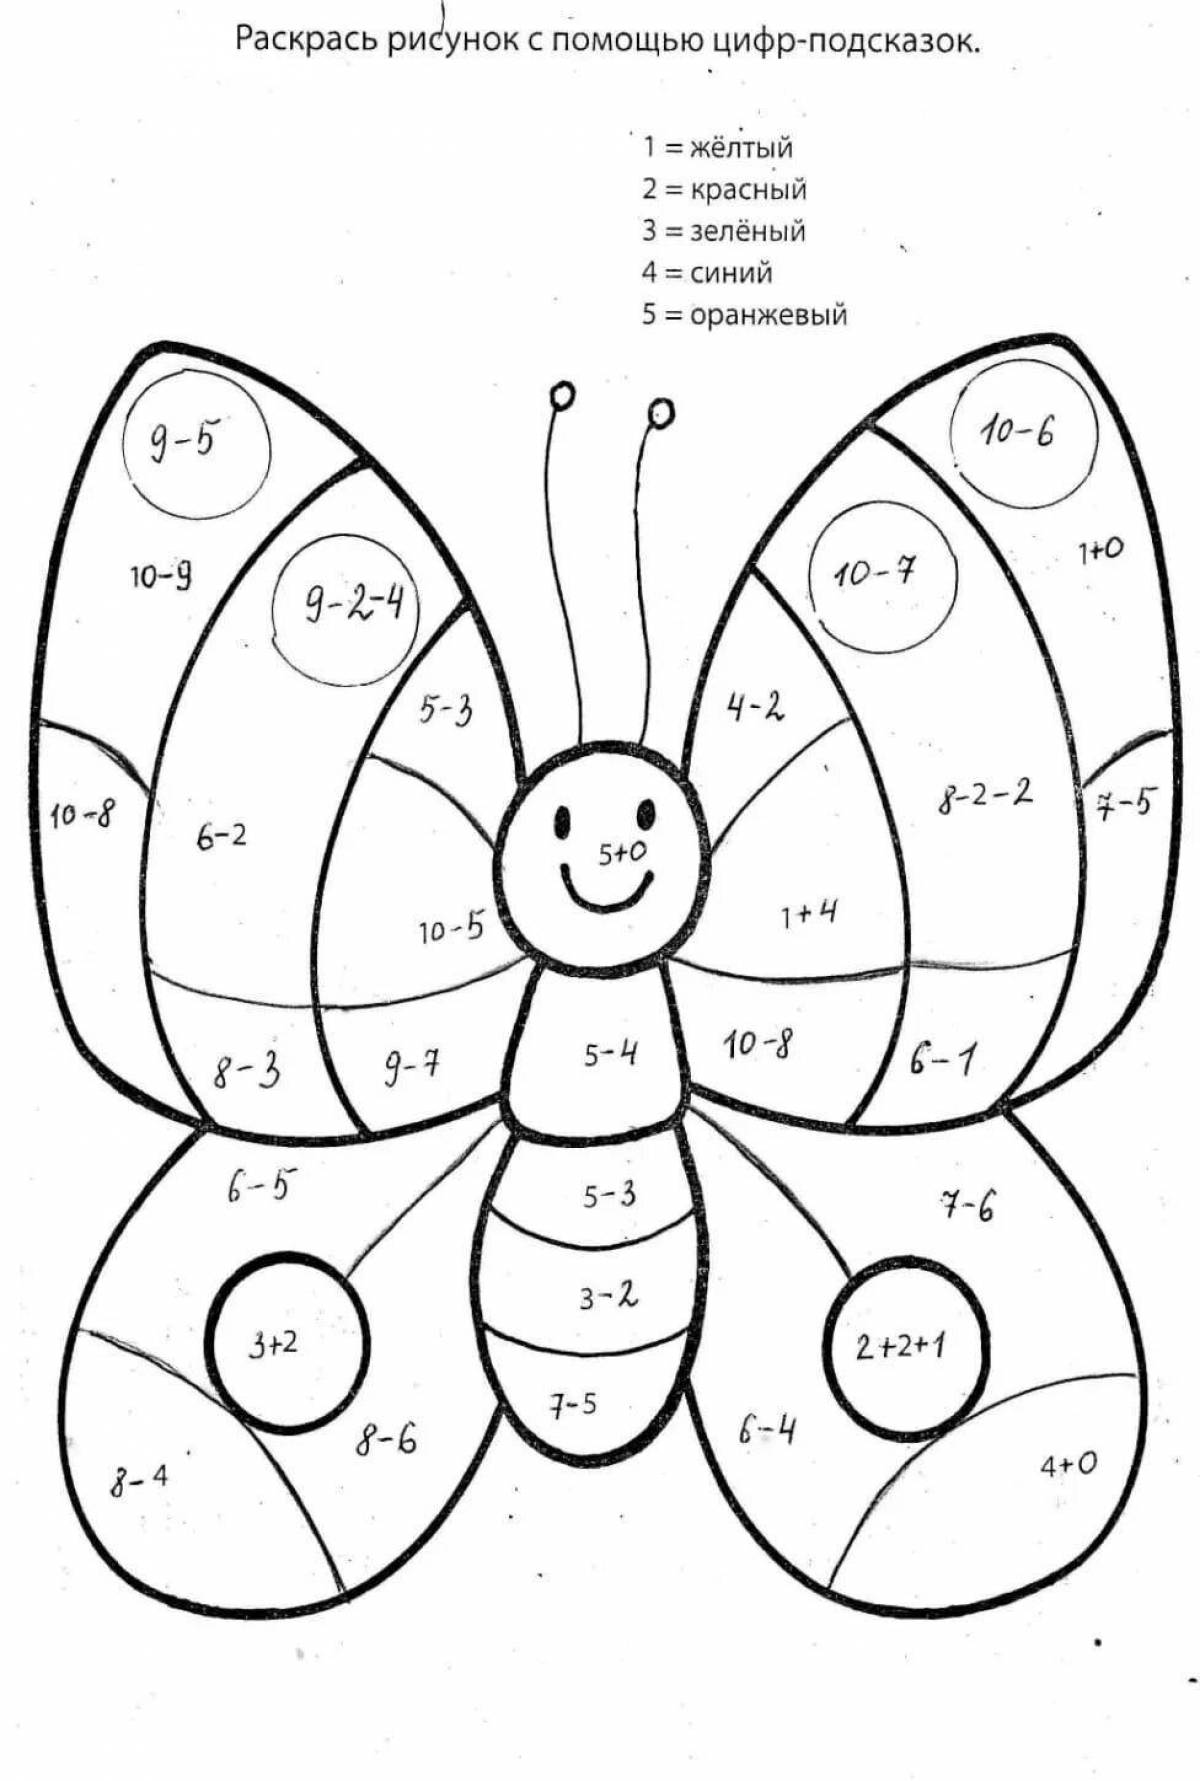 Coloring book fun math examples with examples for preschoolers